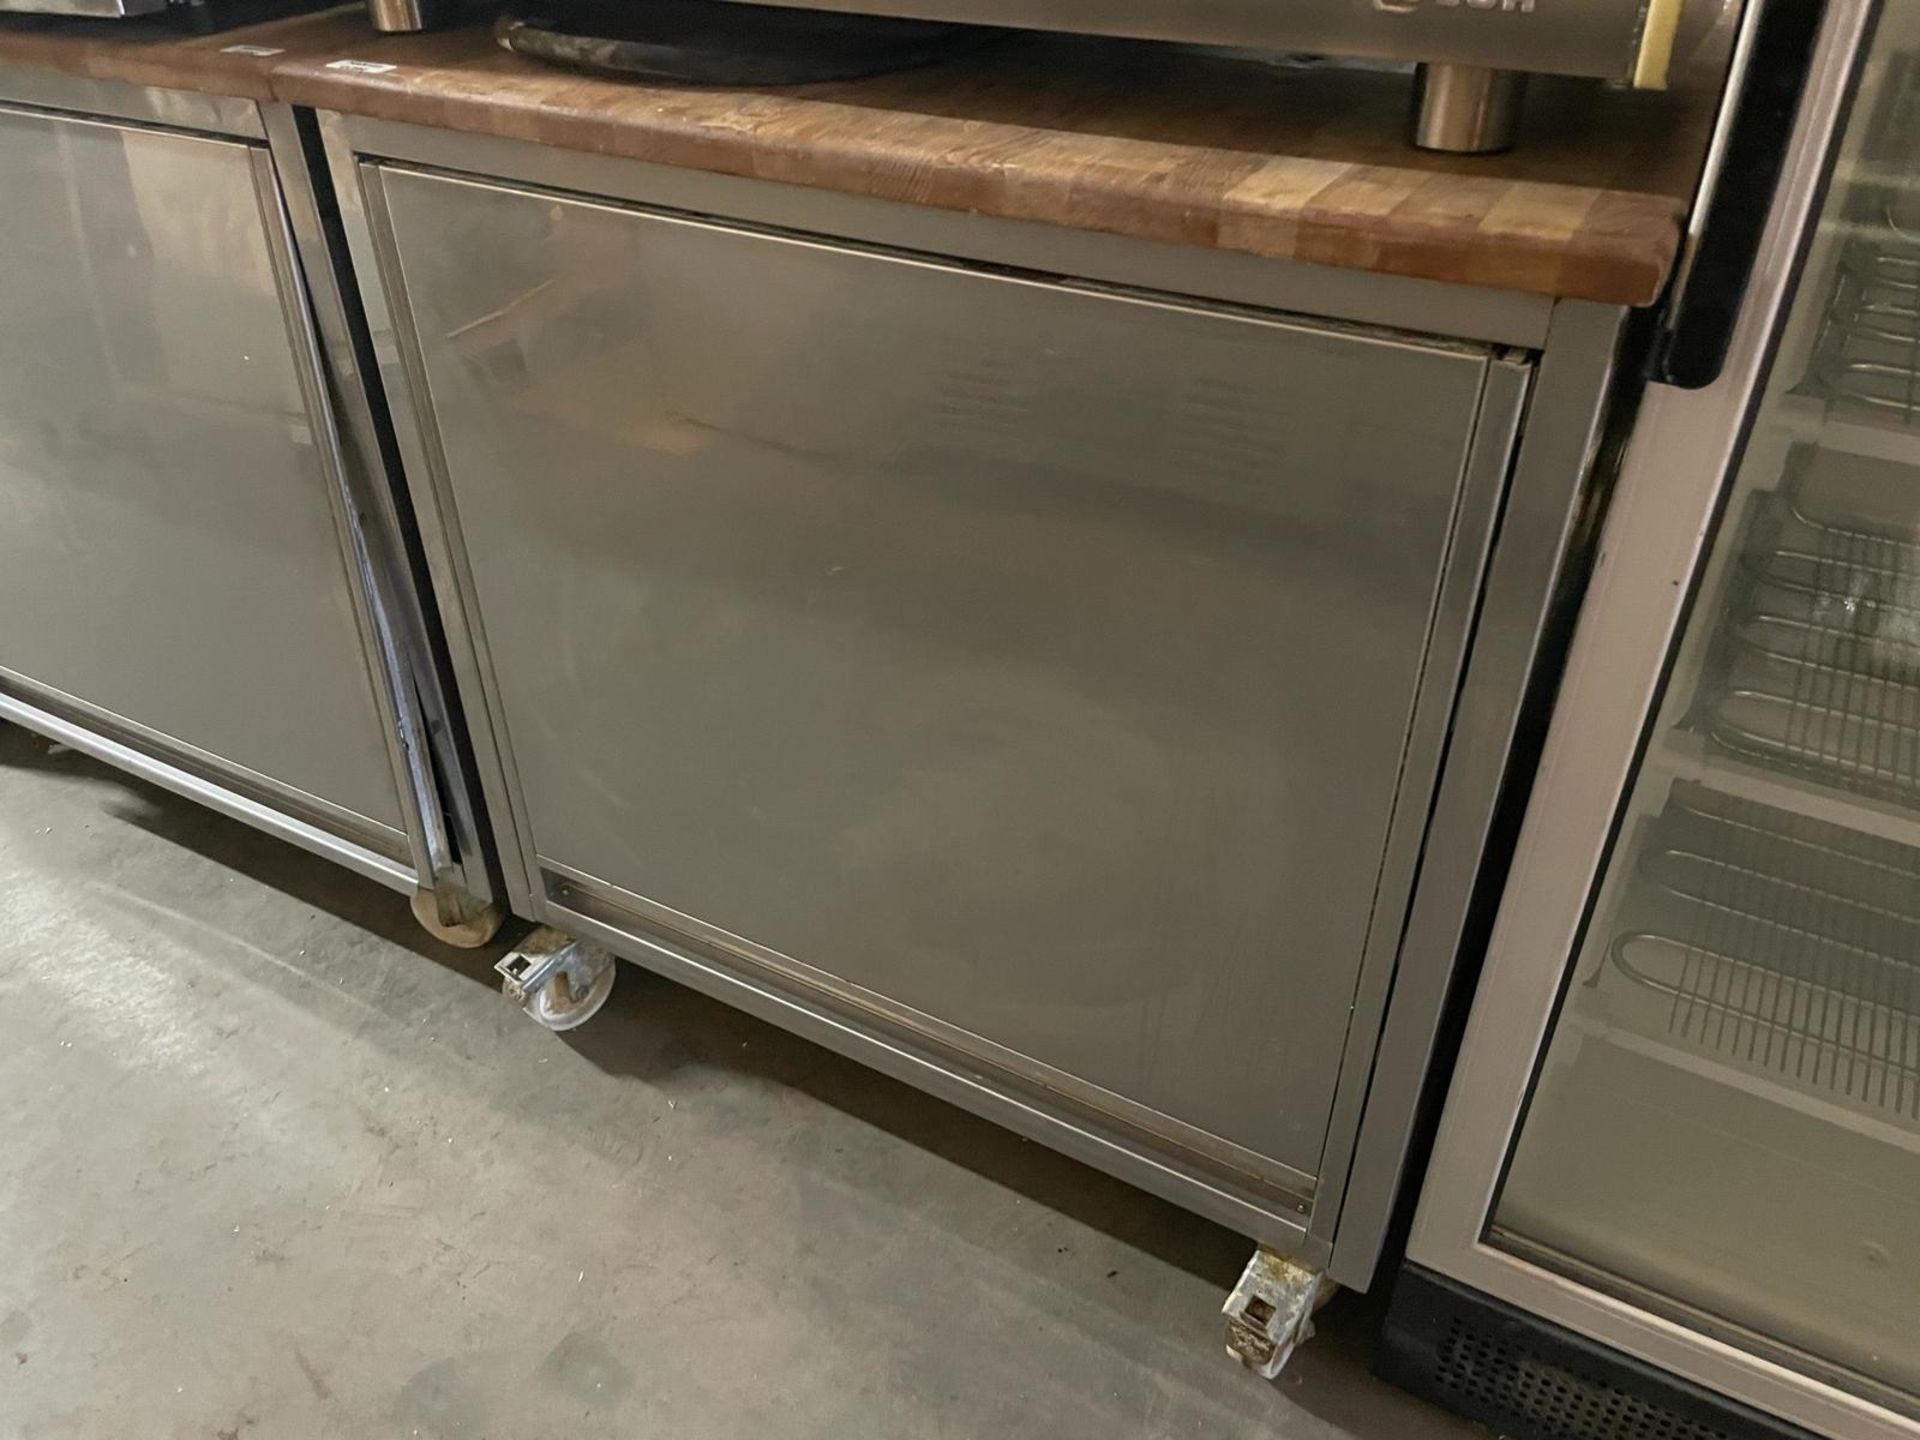 1 x Mobile Stainless Steel Prep Cabinet With Seven Removable Wire Shelves, Sliding Door & Wooden Top - Image 5 of 7